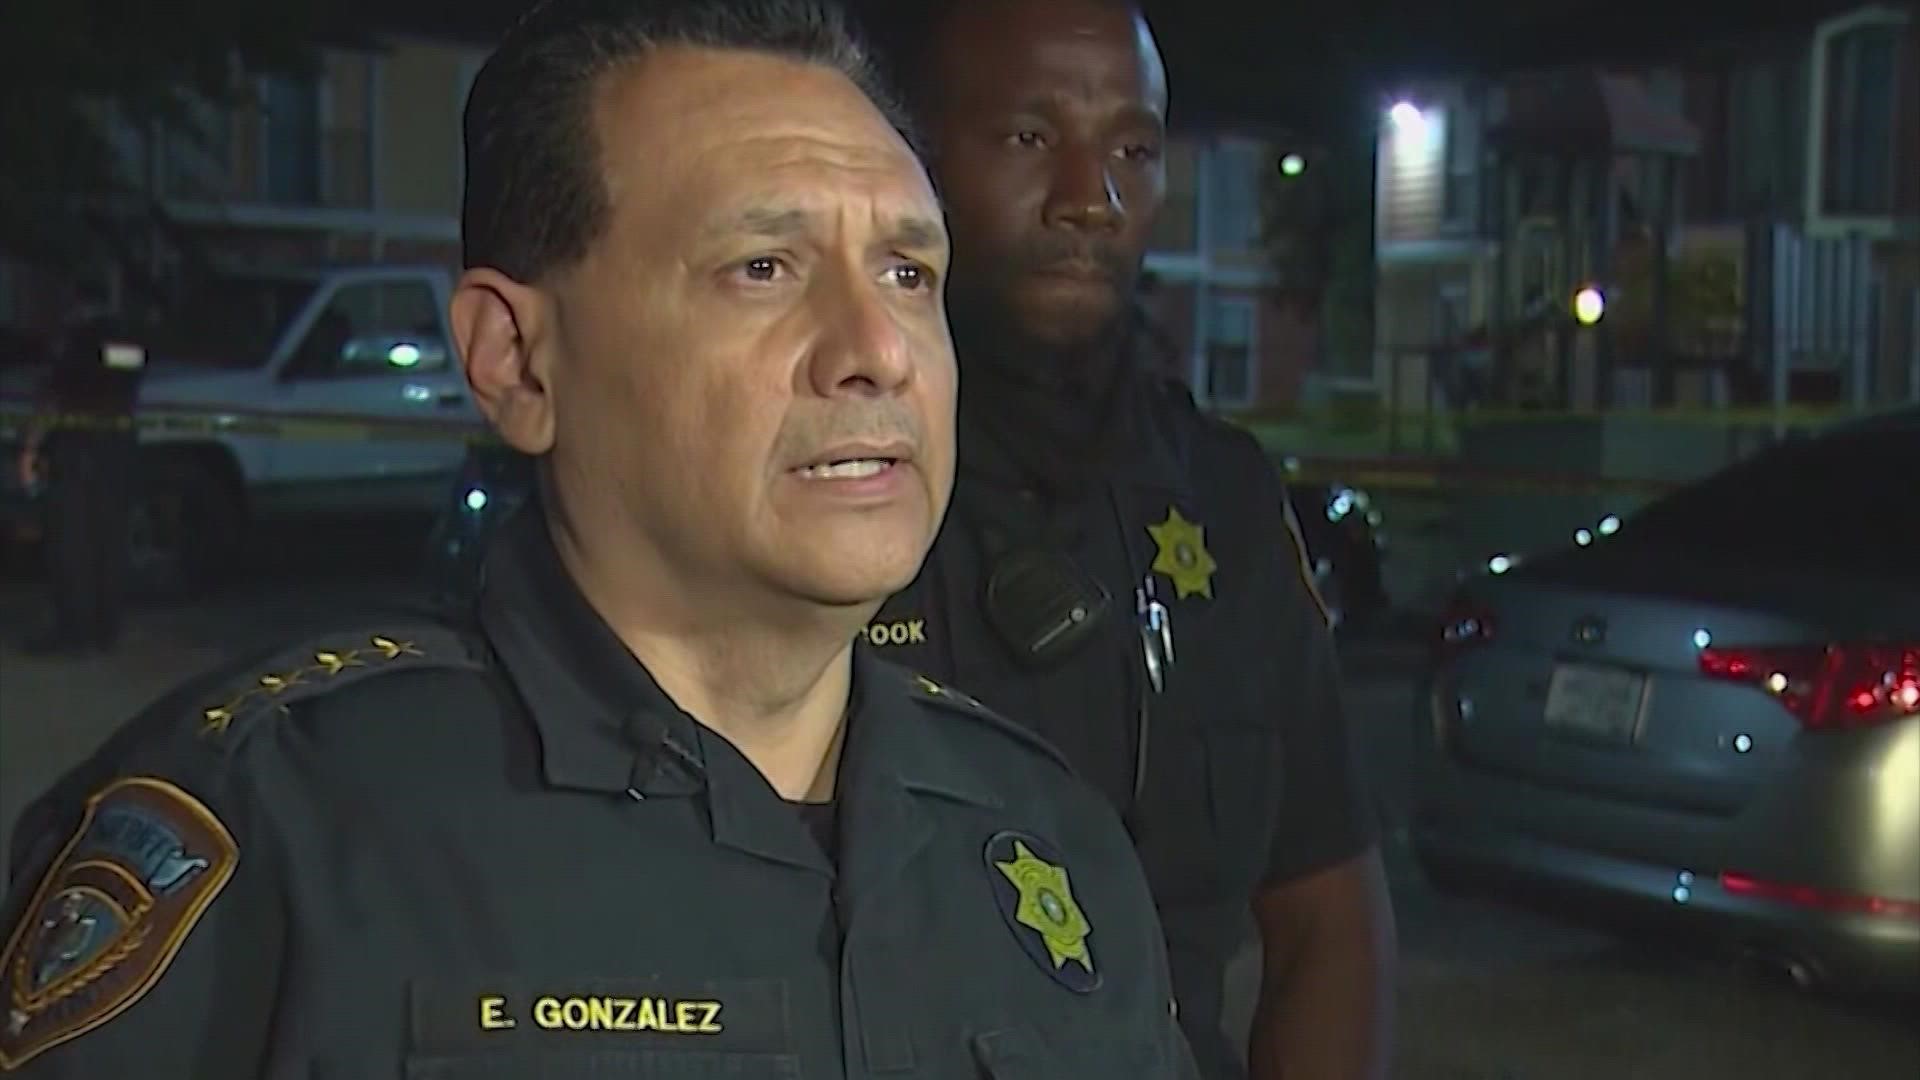 Harris County Sheriff Ed Gonzalez's nomination to lead the U.S. Immigration and Customs Enforcement has stalled.